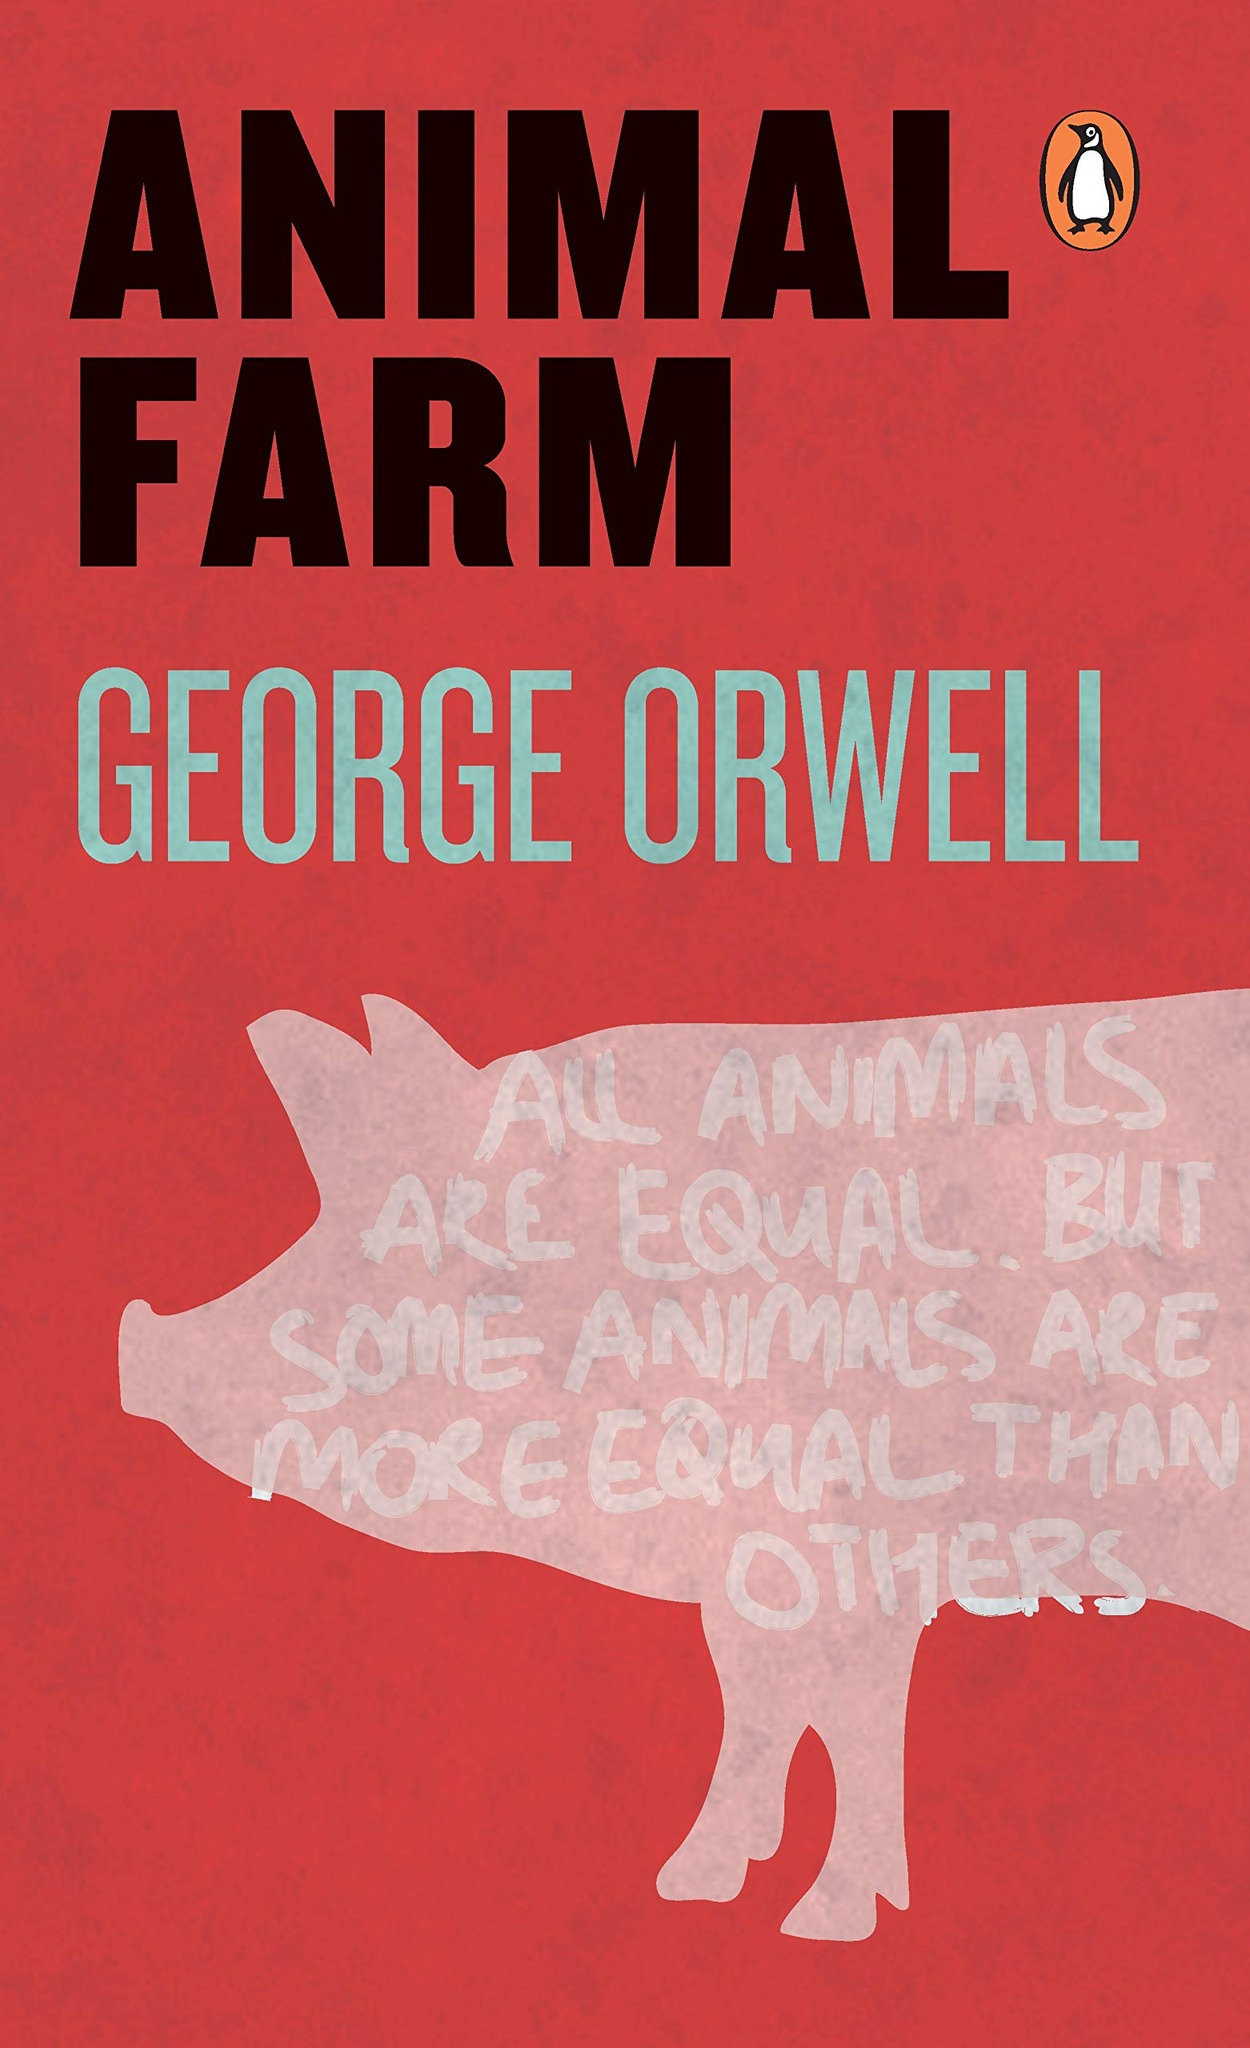 May be an image of text that says 'ANIMAL FARM GEORGE ORWELL ALL ANIMALS ARE EQUAL BUT SOME ANIMALS ALE WOREEQUAL THAN OTHERS'